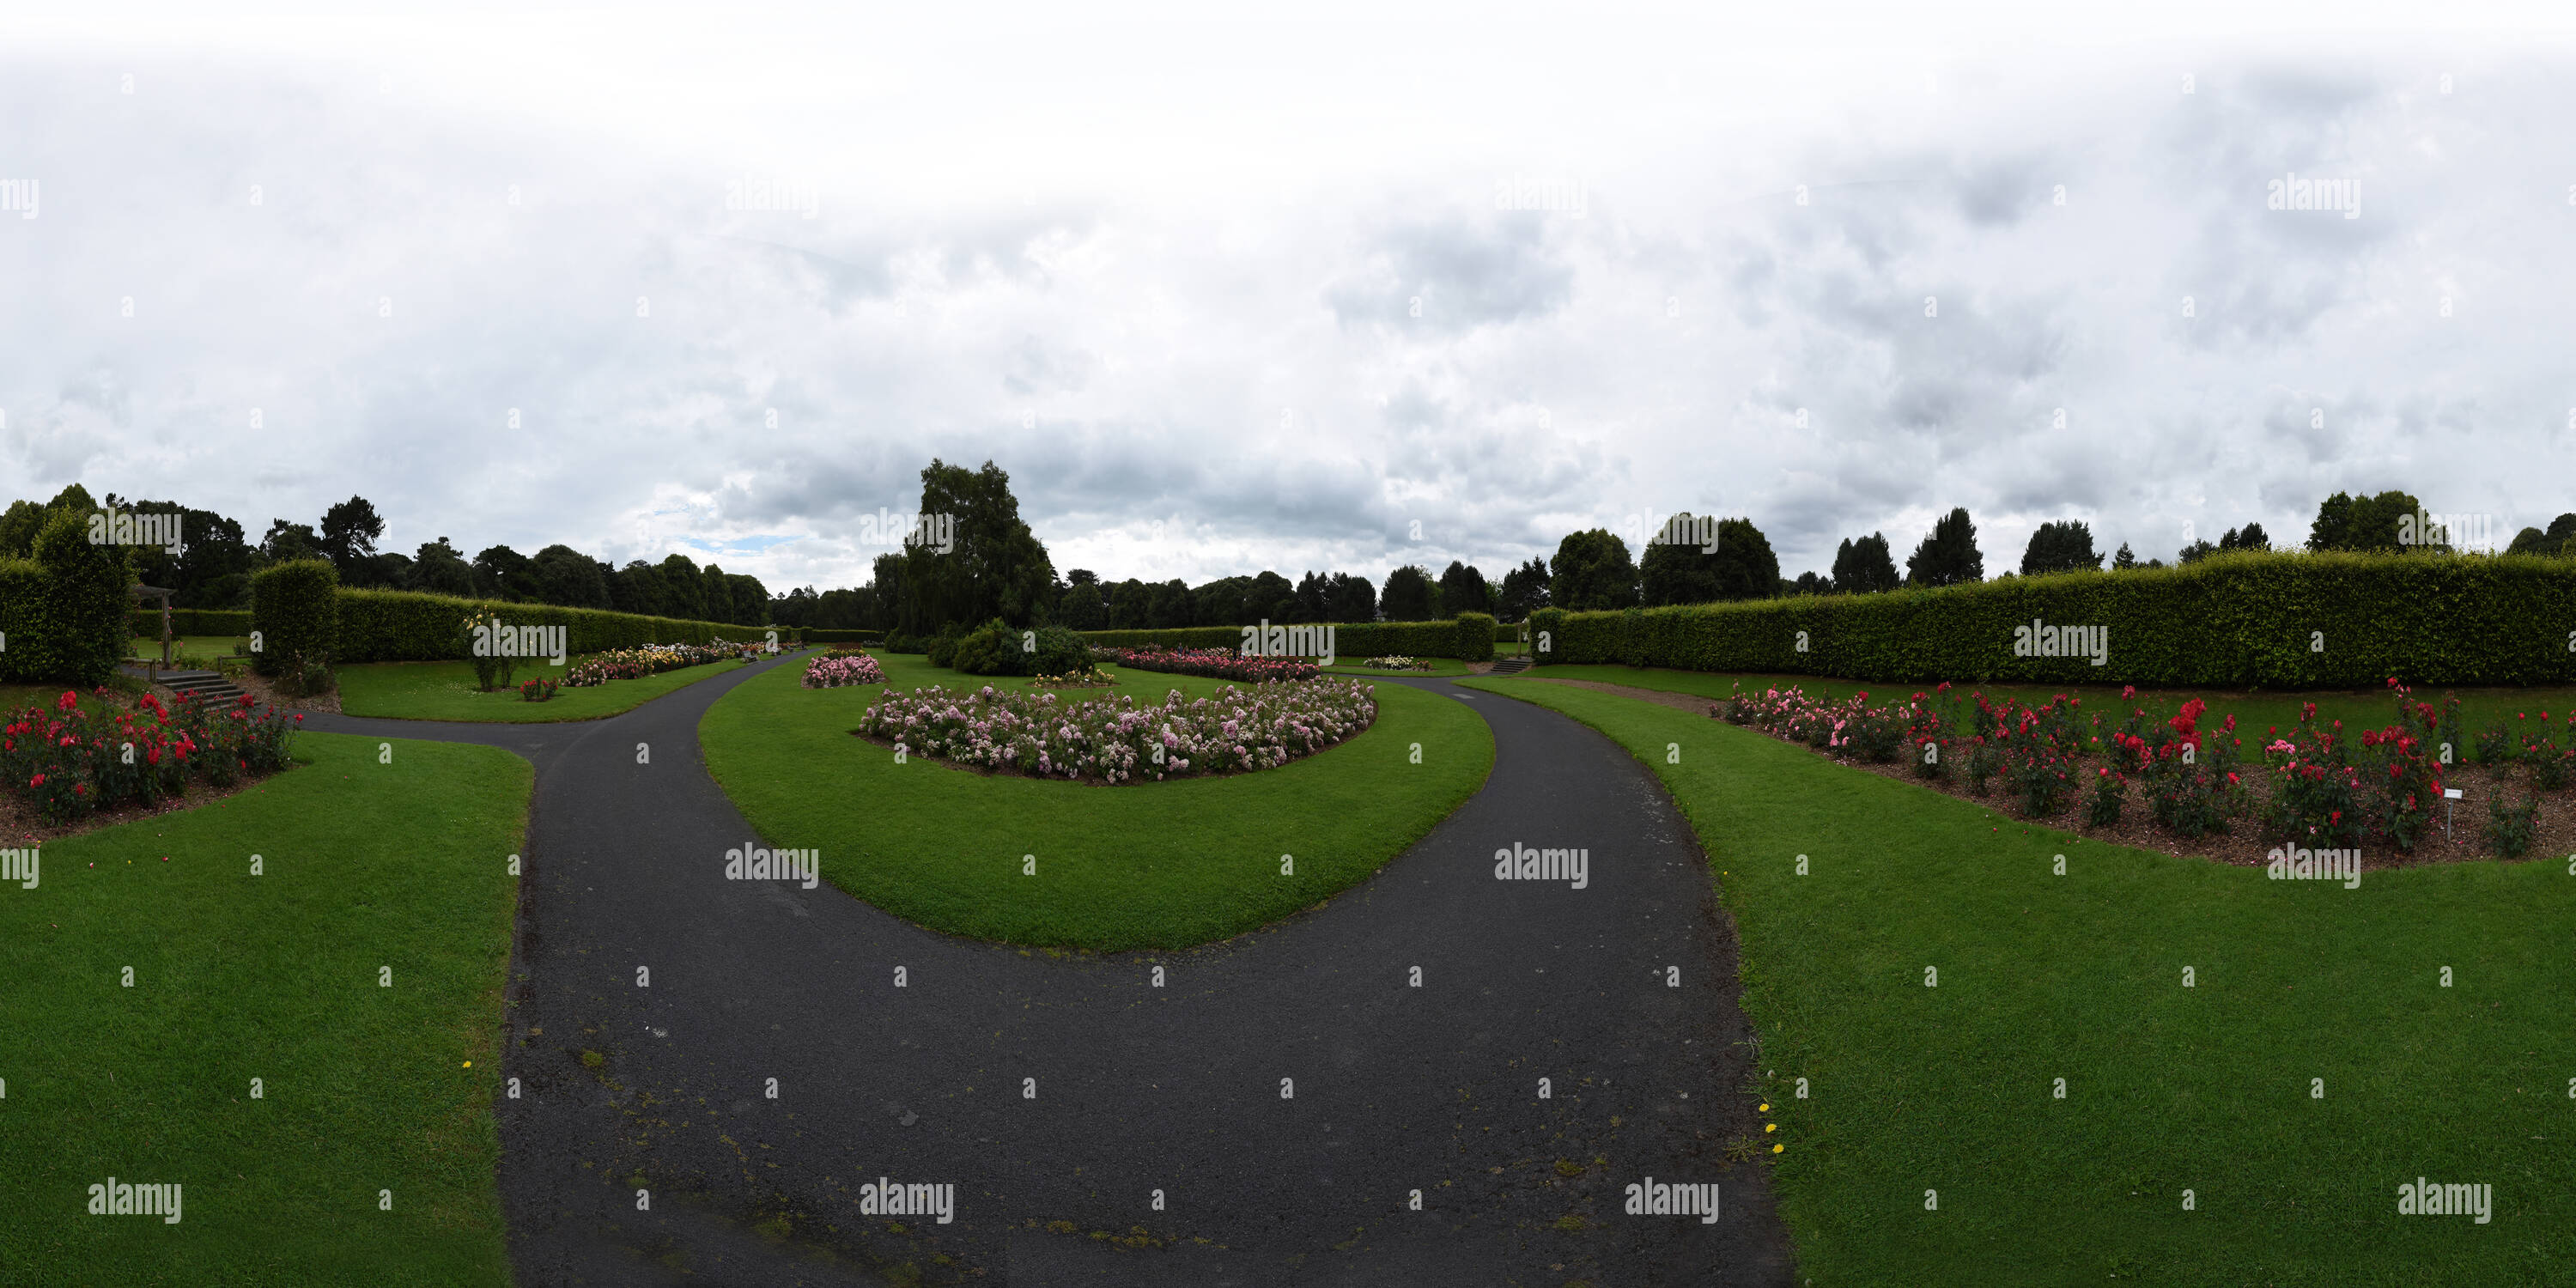 360 degree panoramic view of St Annes Park- Rose Garden, Clontarf